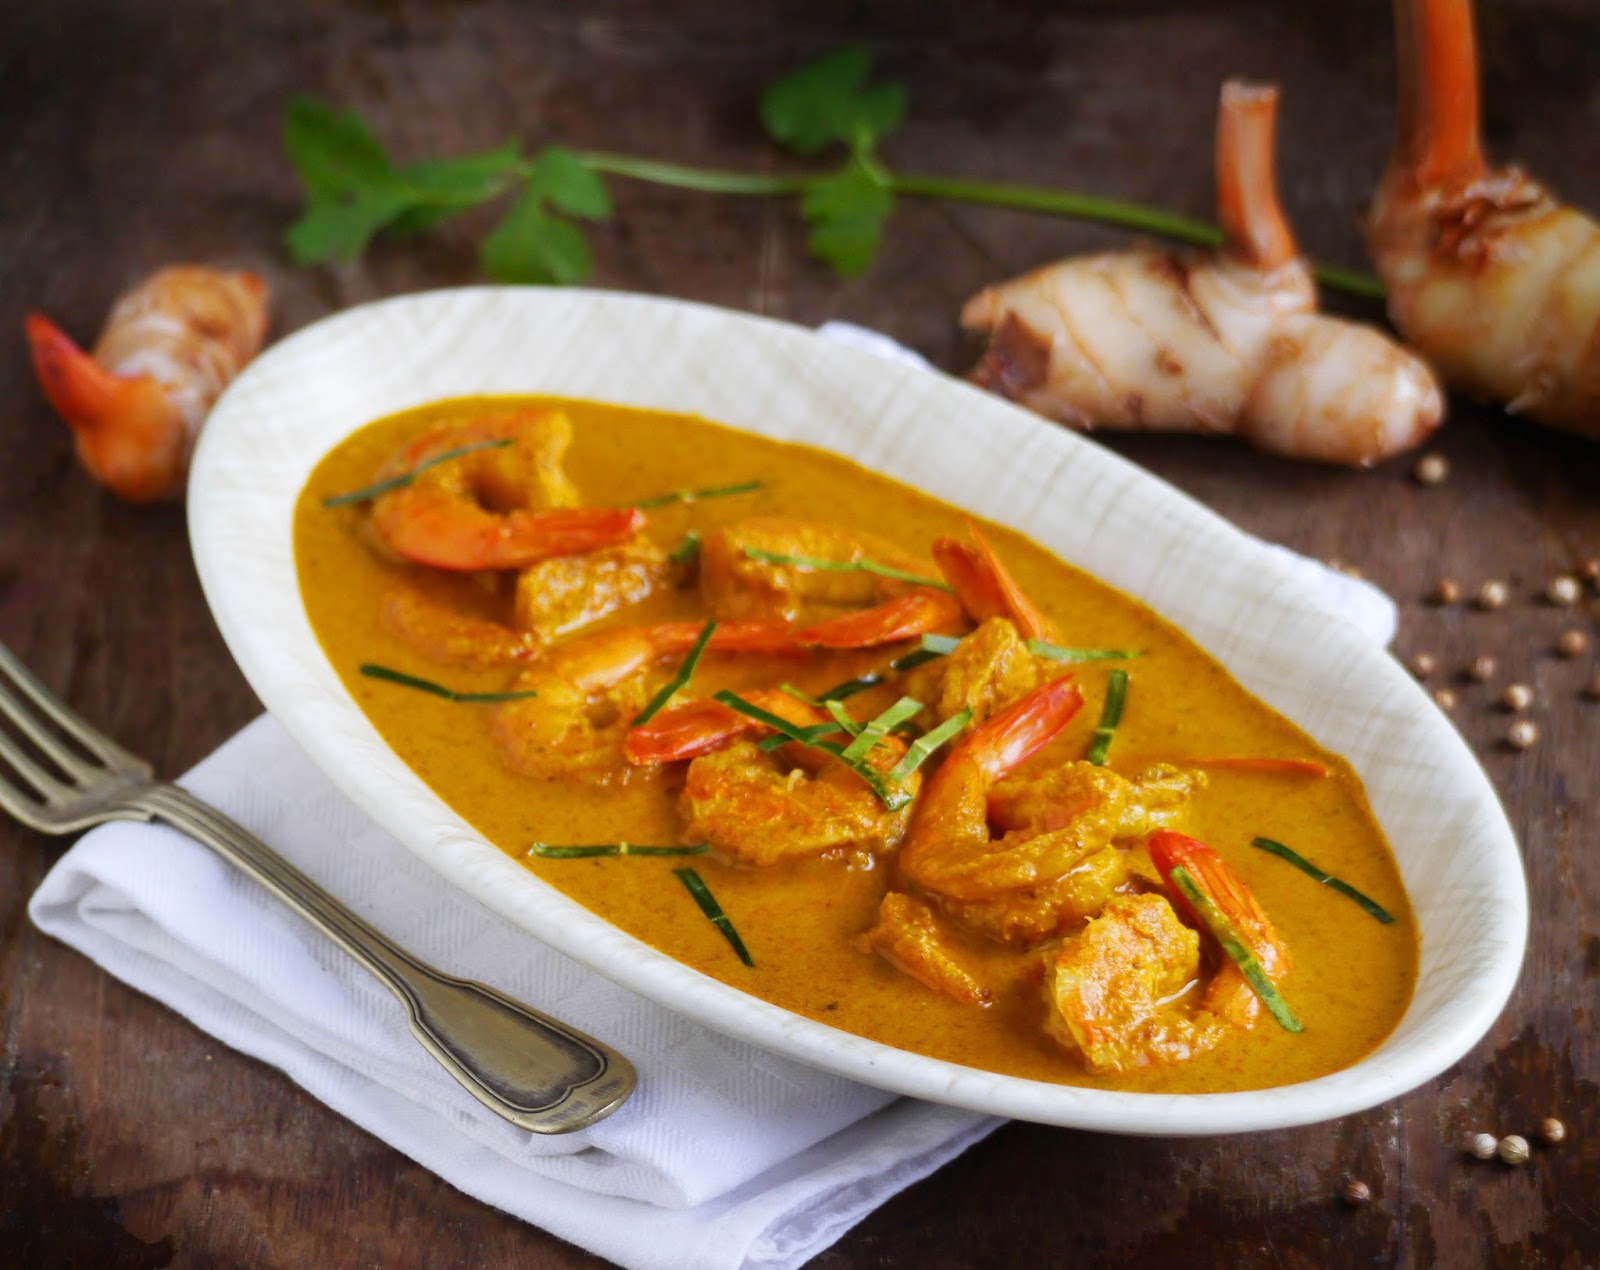 The Food Trotter: Prawn Panang Curry / Curry panang de crevettes